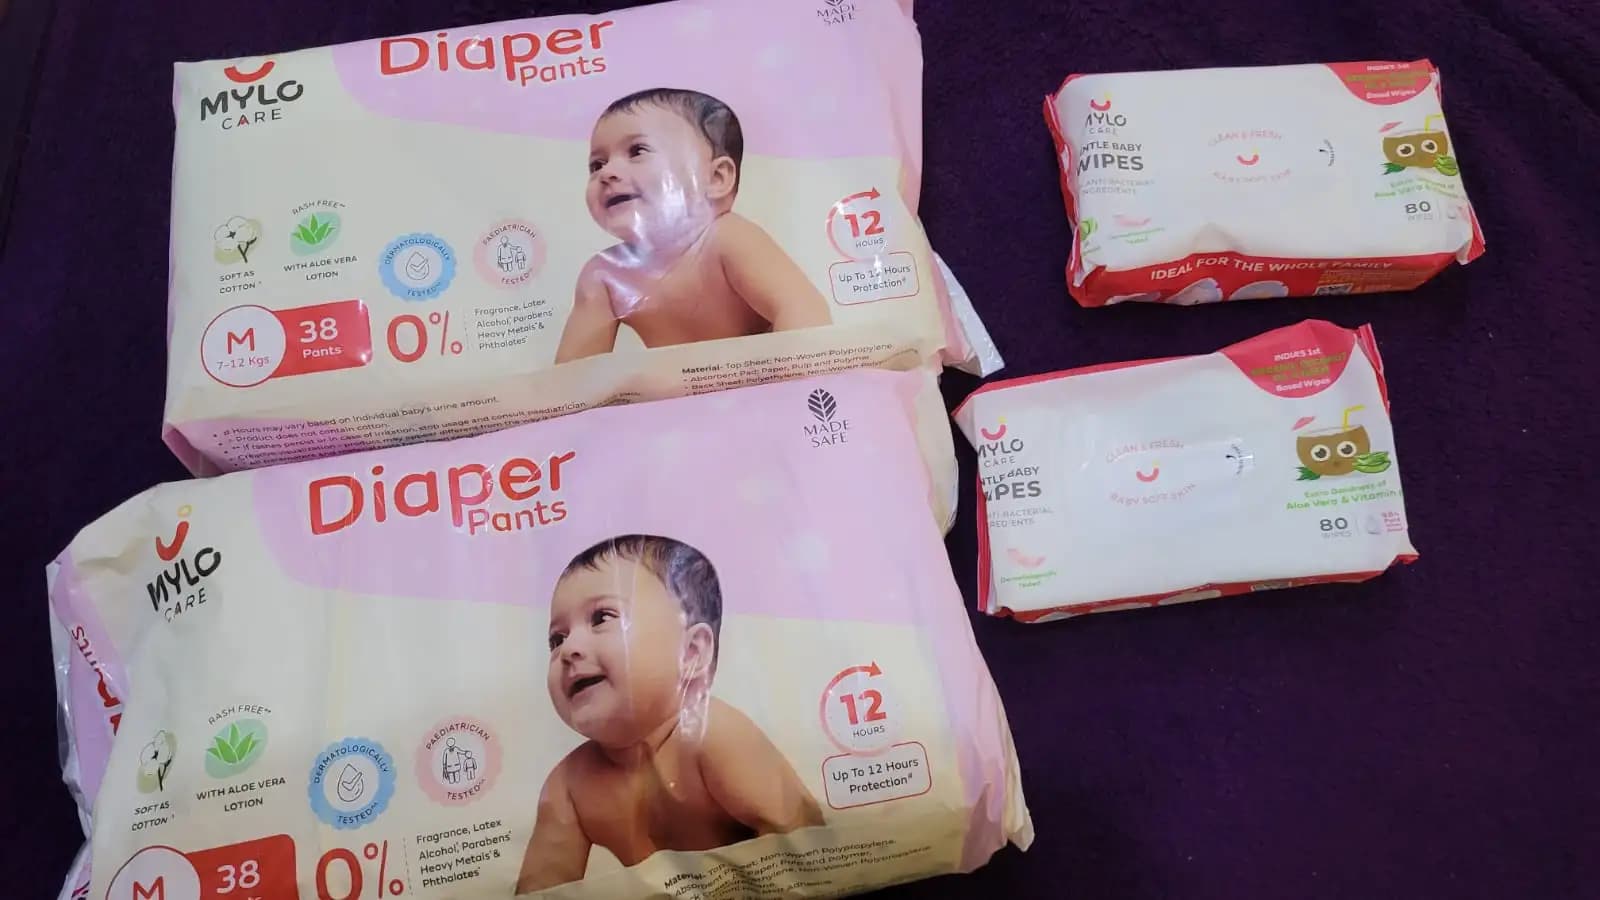 Baby Diaper Pants Large (L) Size 9-14 kgs (Jumbo Pack) + Baby Soap (Pack of 3)